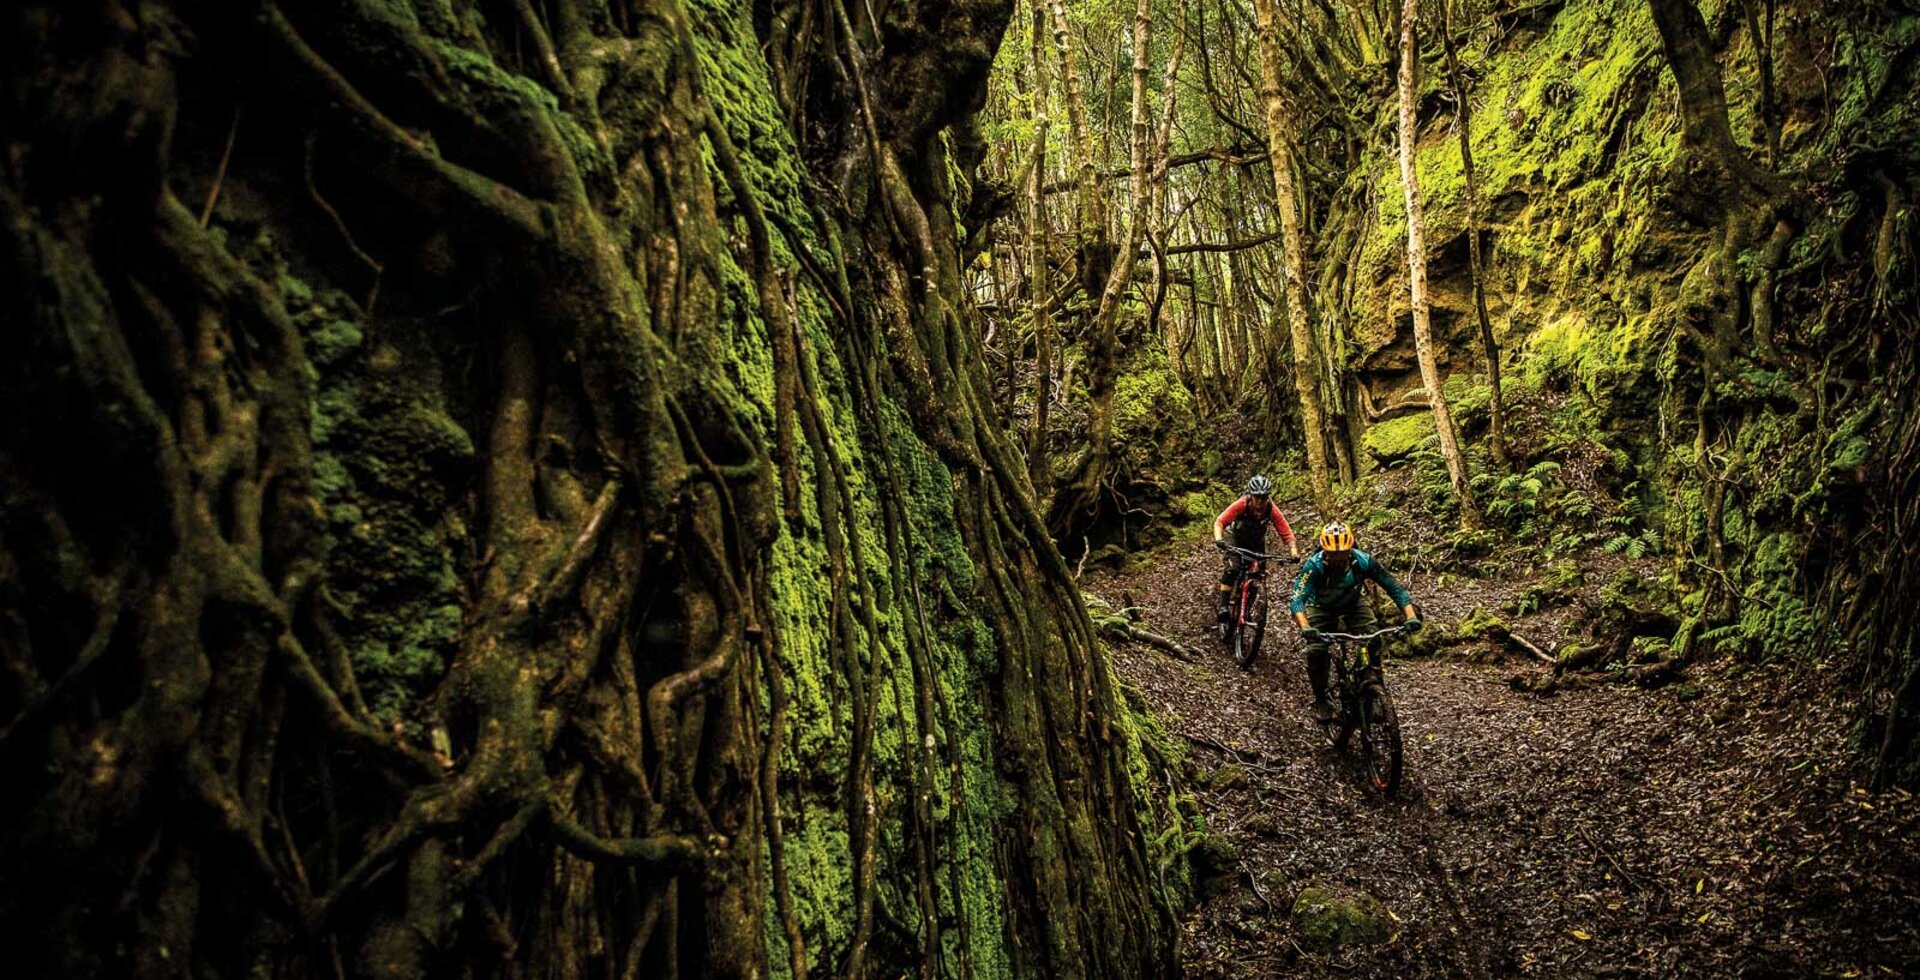 Steep, deep and untracked—the fertile volcanic soil of the Azores also happens to make for some ultra-loamy trail conditions. Guide and purveyor of the local bike scene, Carlos Dos Santos, leads the author through a chute while touring the trail offerings for his planned Trans-Atlantis enduro race.